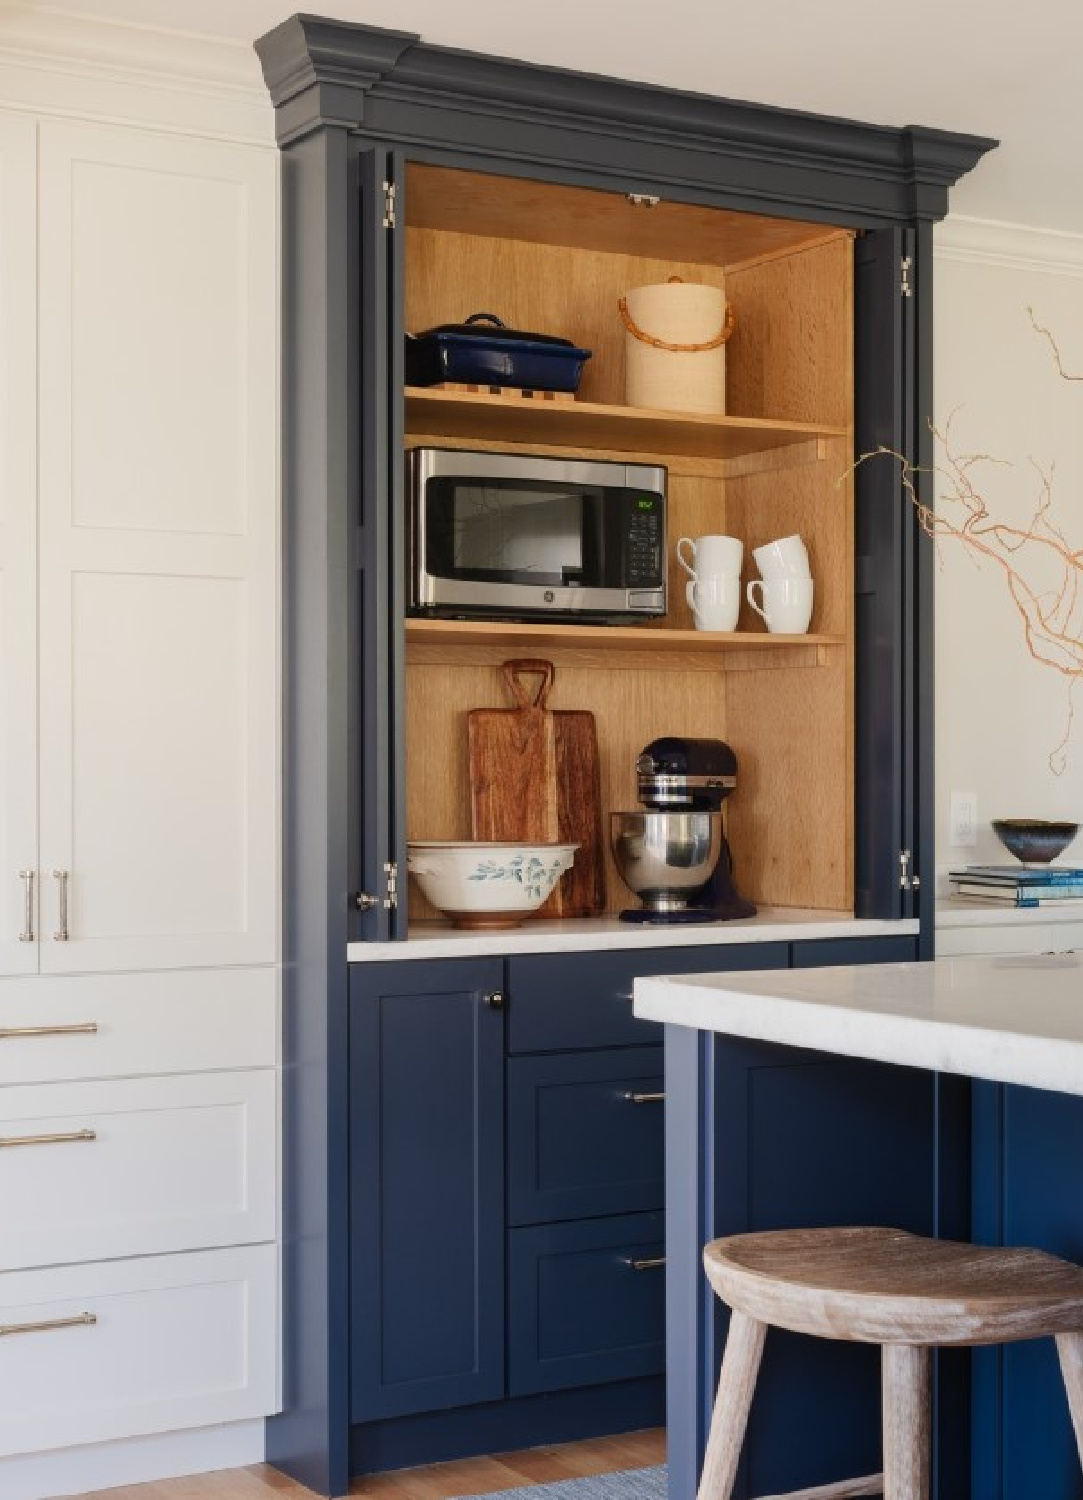 Navy blue painted built-in pantry cabinet in a beautiful white kitchen - @bethbourque. #navybluekitchen #twotonekitchens